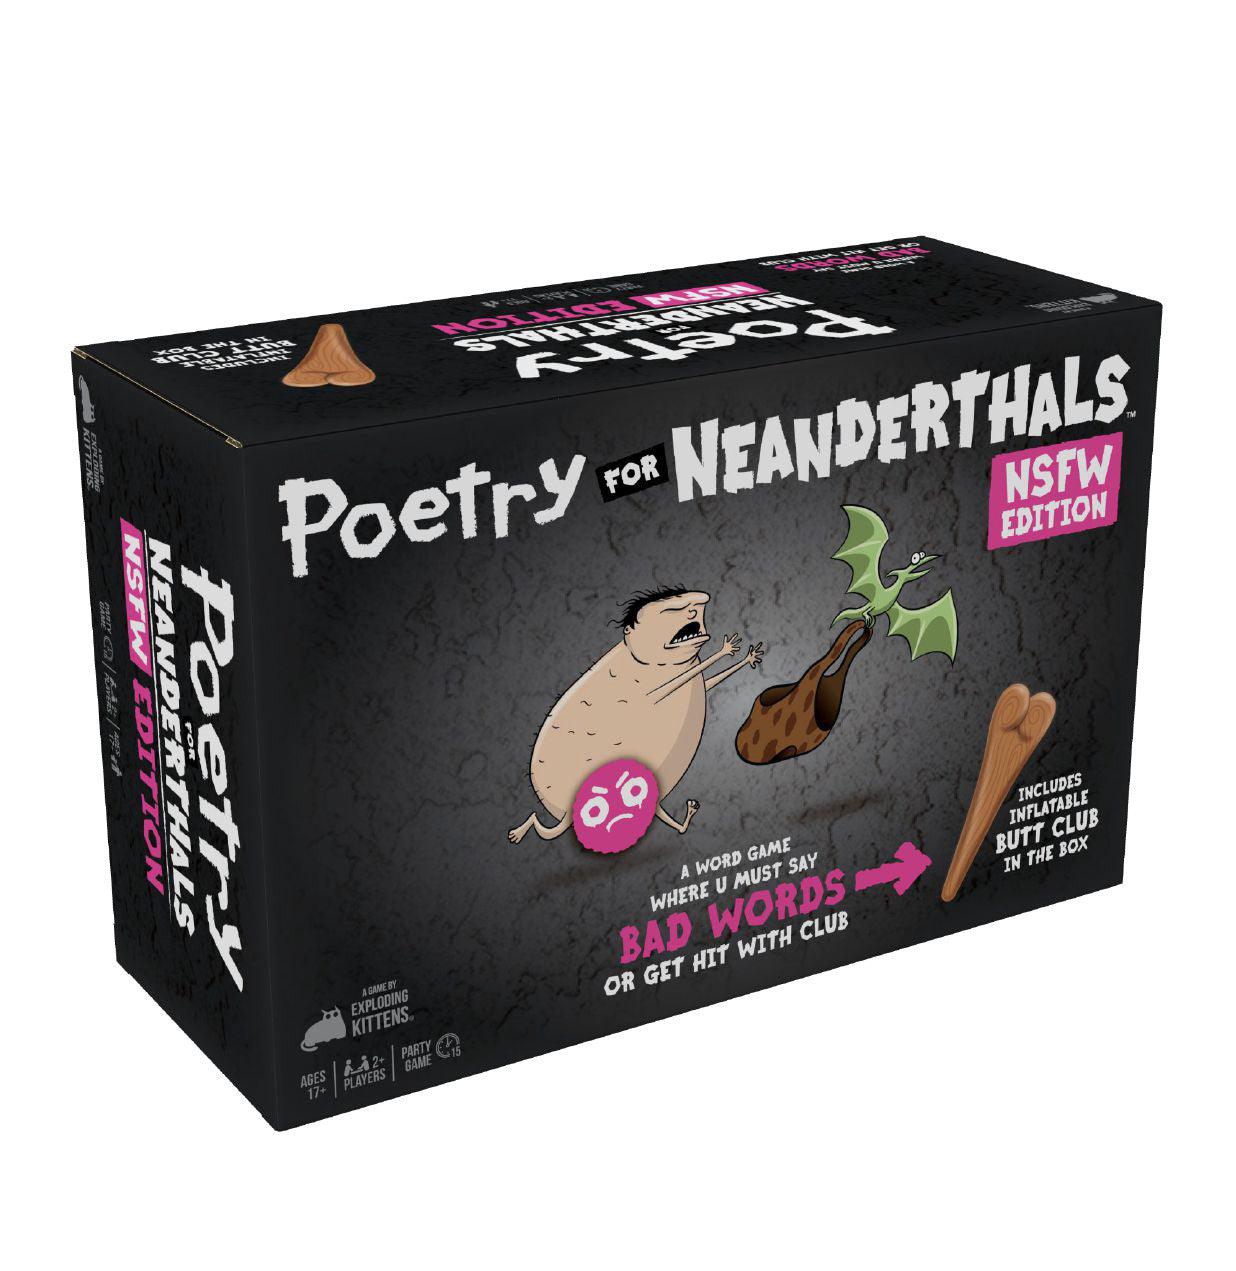 VR-96715 Poetry for Neanderthals NSFW (By Exploding Kittens) - Exploding Kittens - Titan Pop Culture